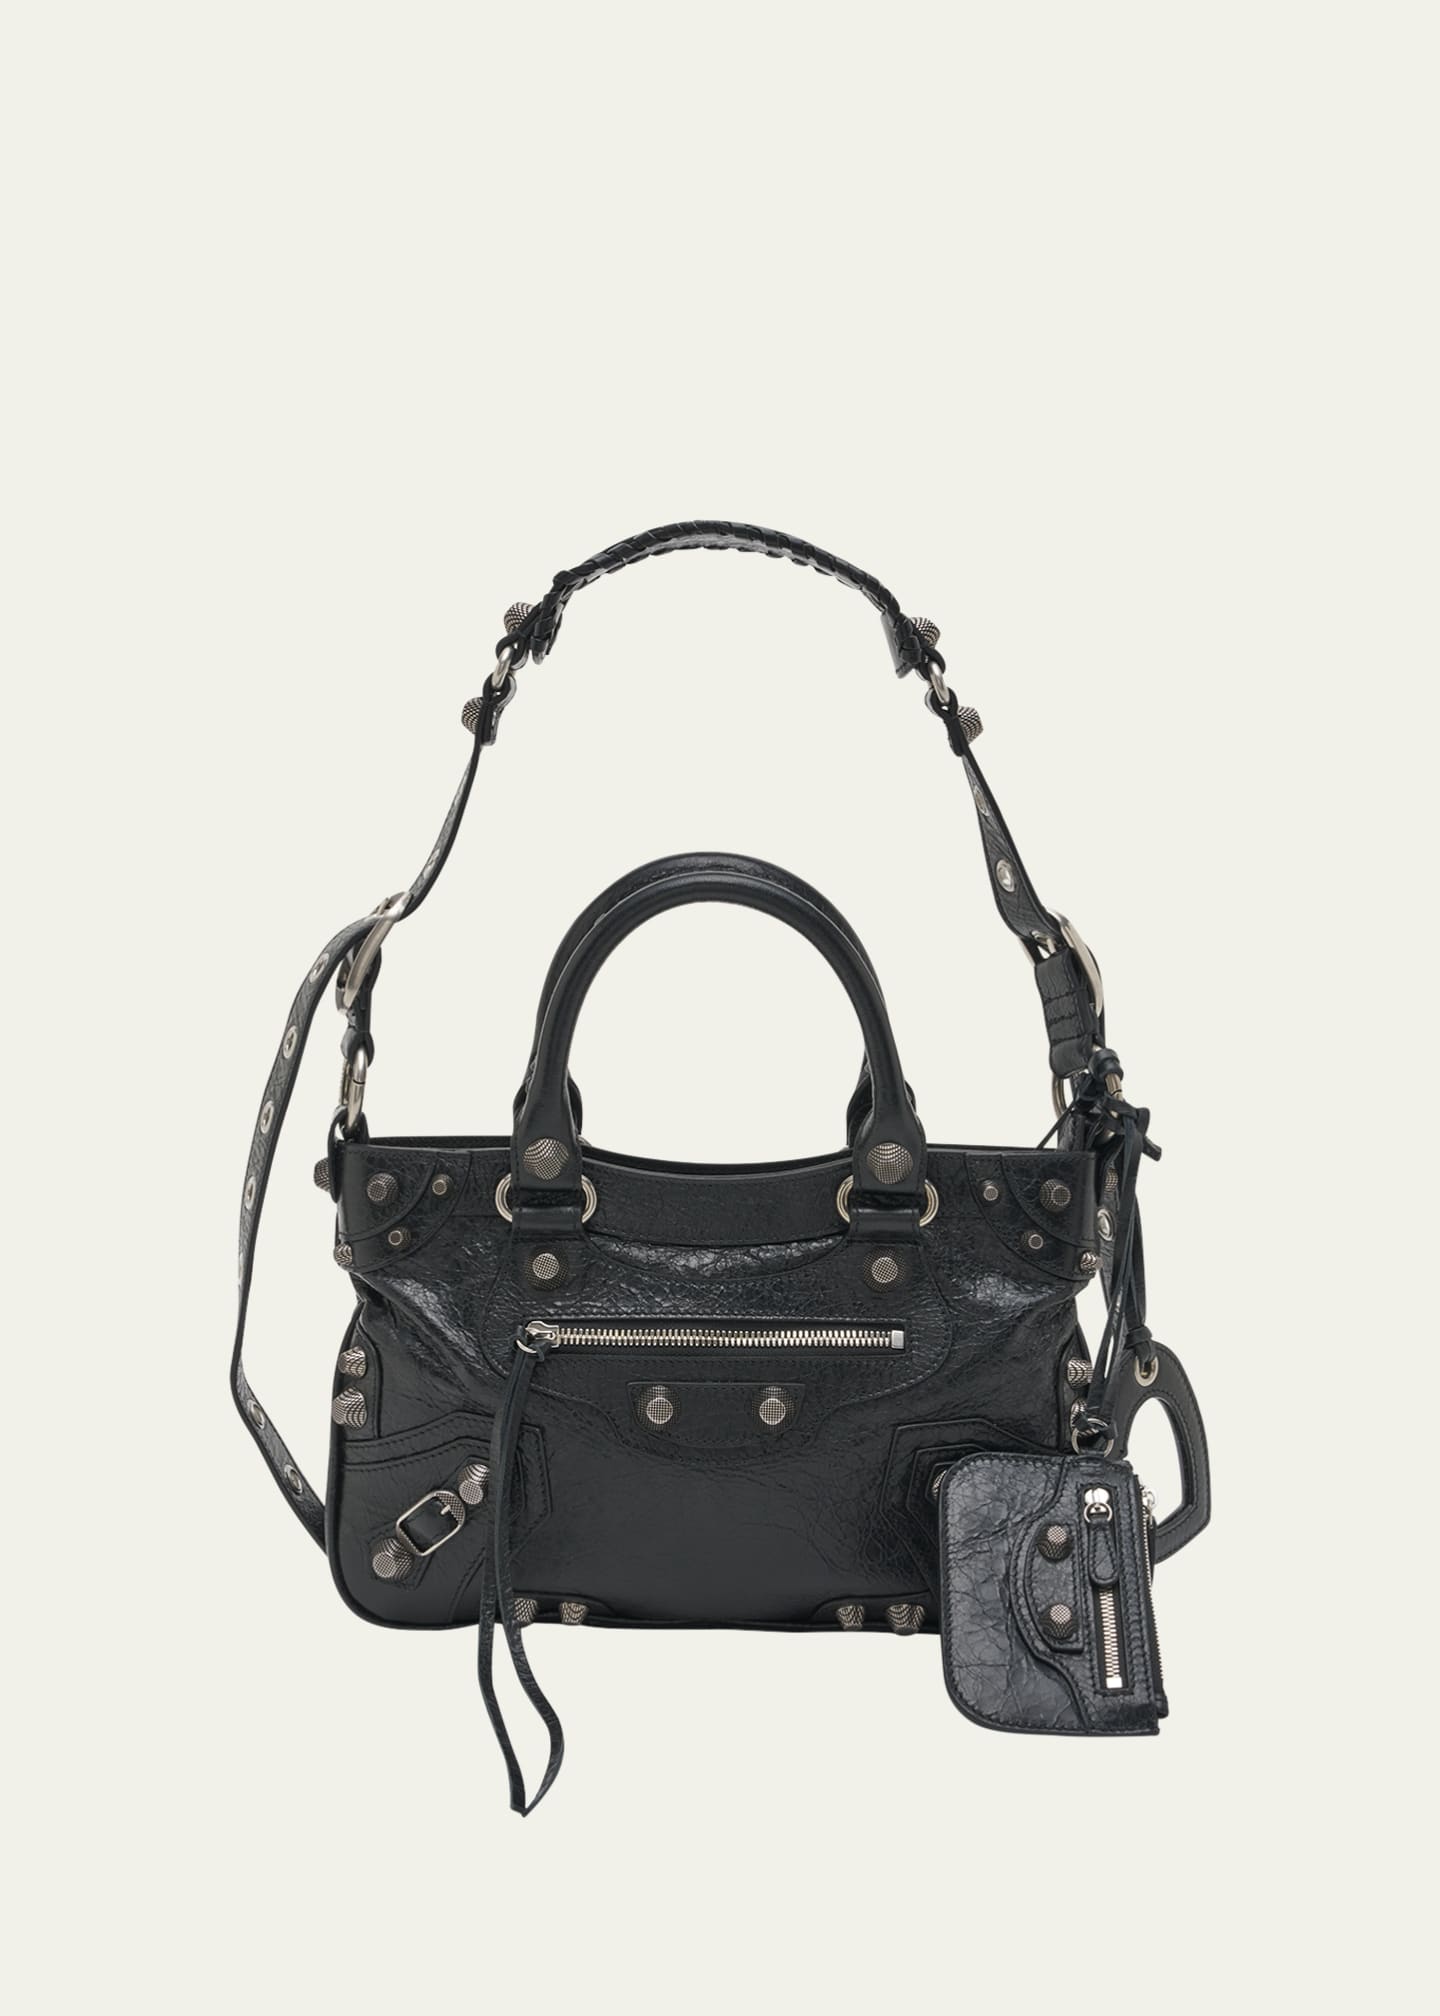 Le Cagole by Balenciaga is the it-bag of the moment